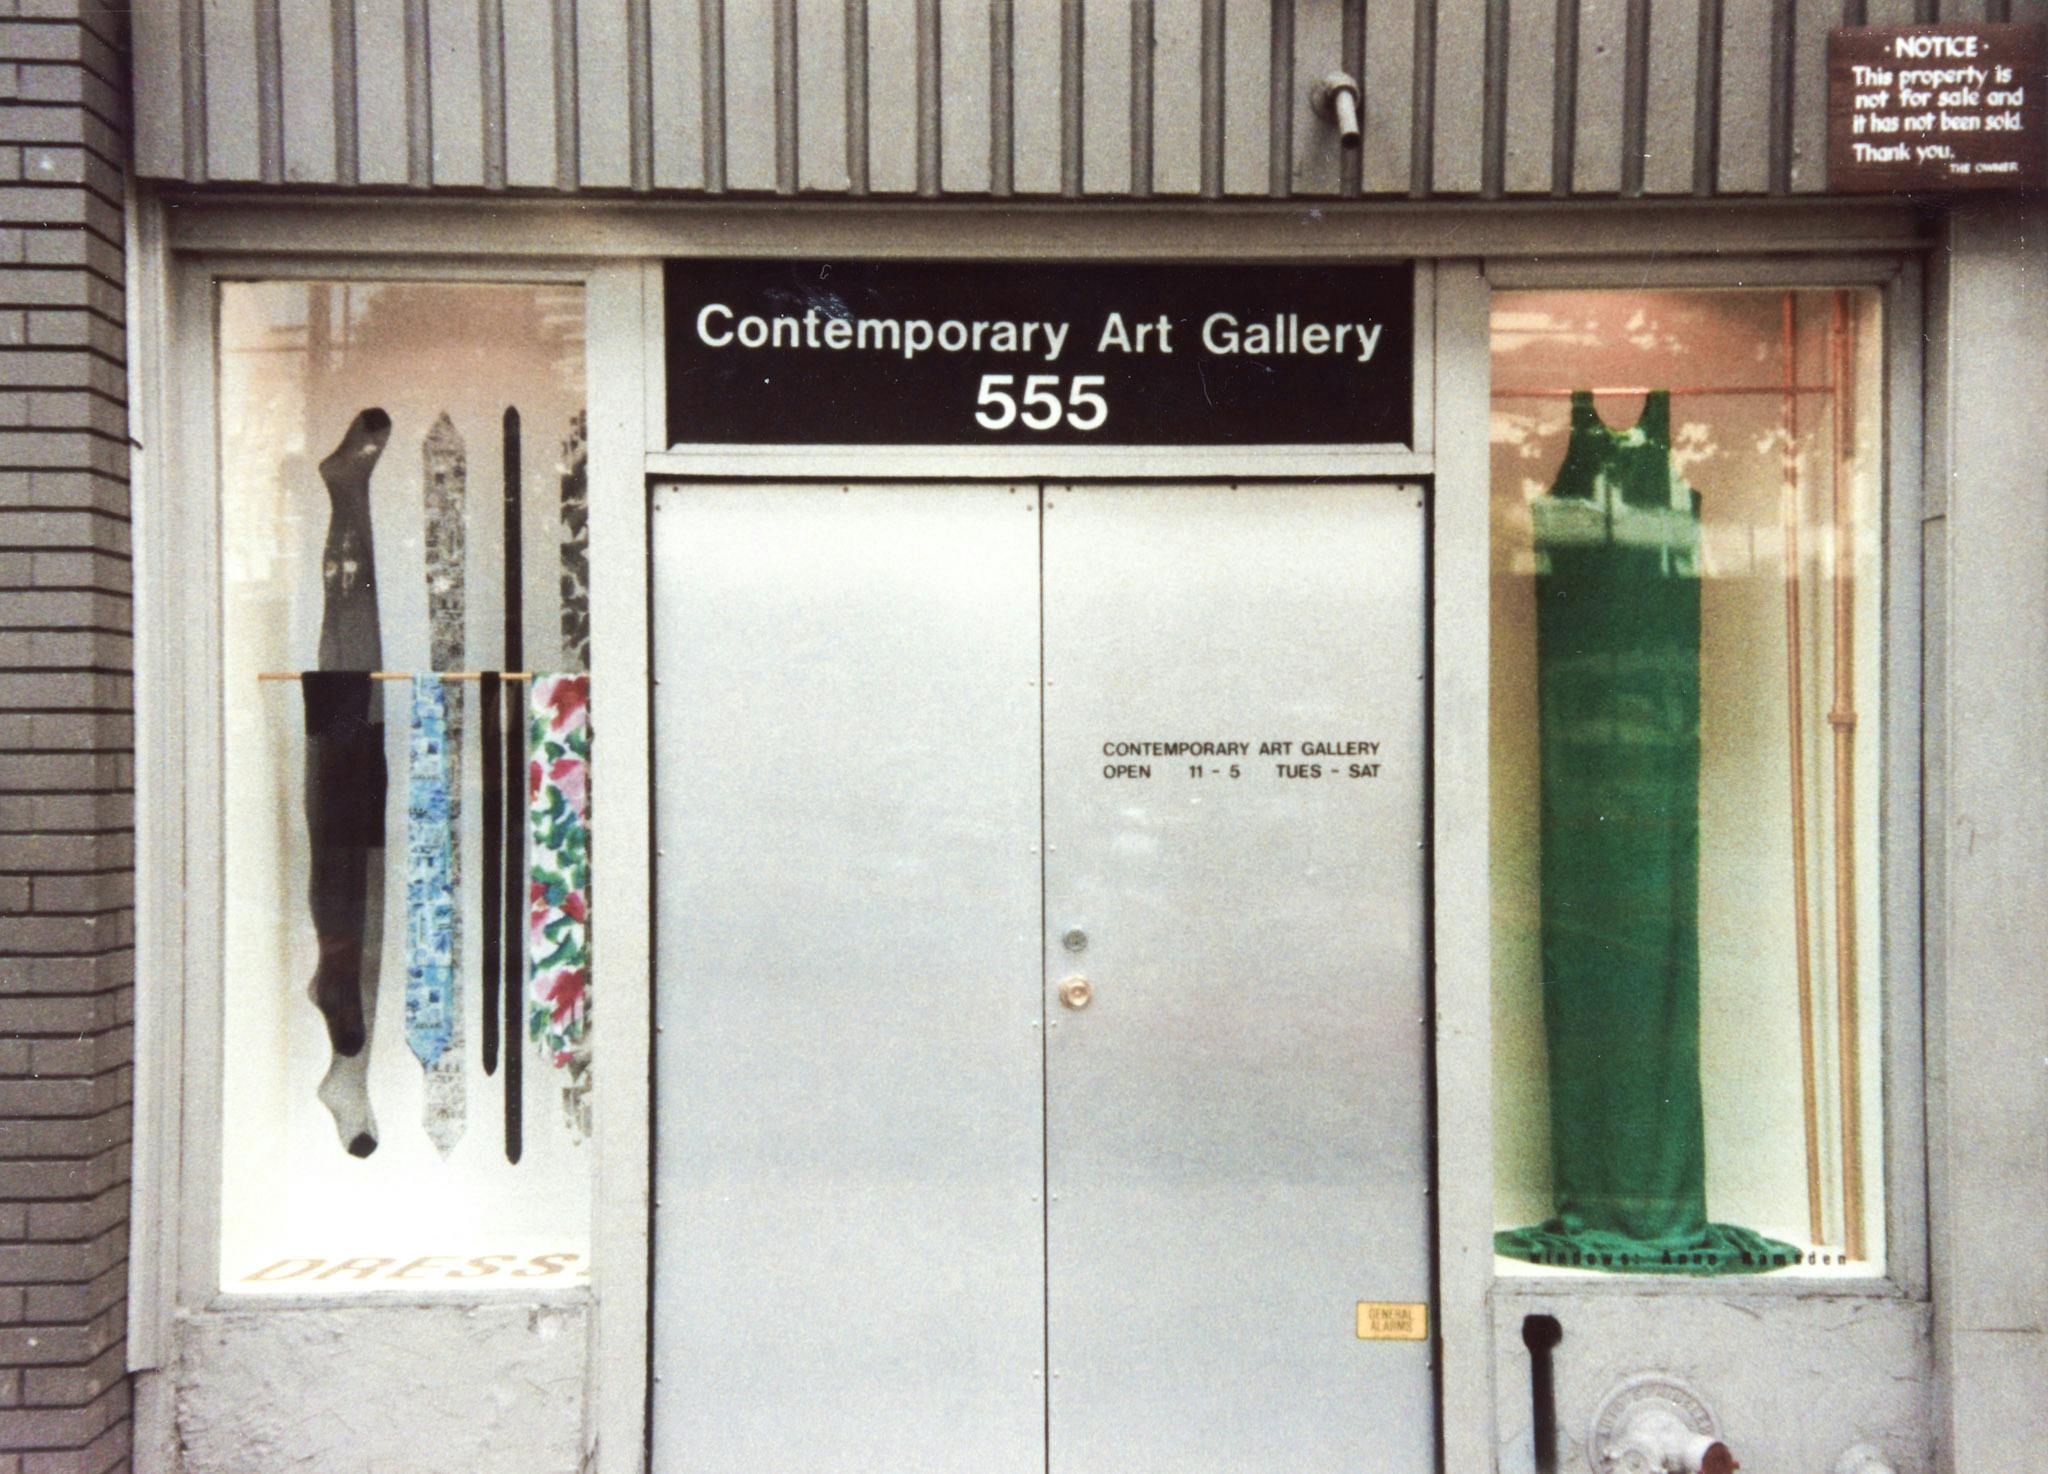 The facade of a gallery, with artworks in the window display. The works in the windows consist of garments hanging on metal rods, including pantyhose, neckties, a belt, and a bright green dress. 